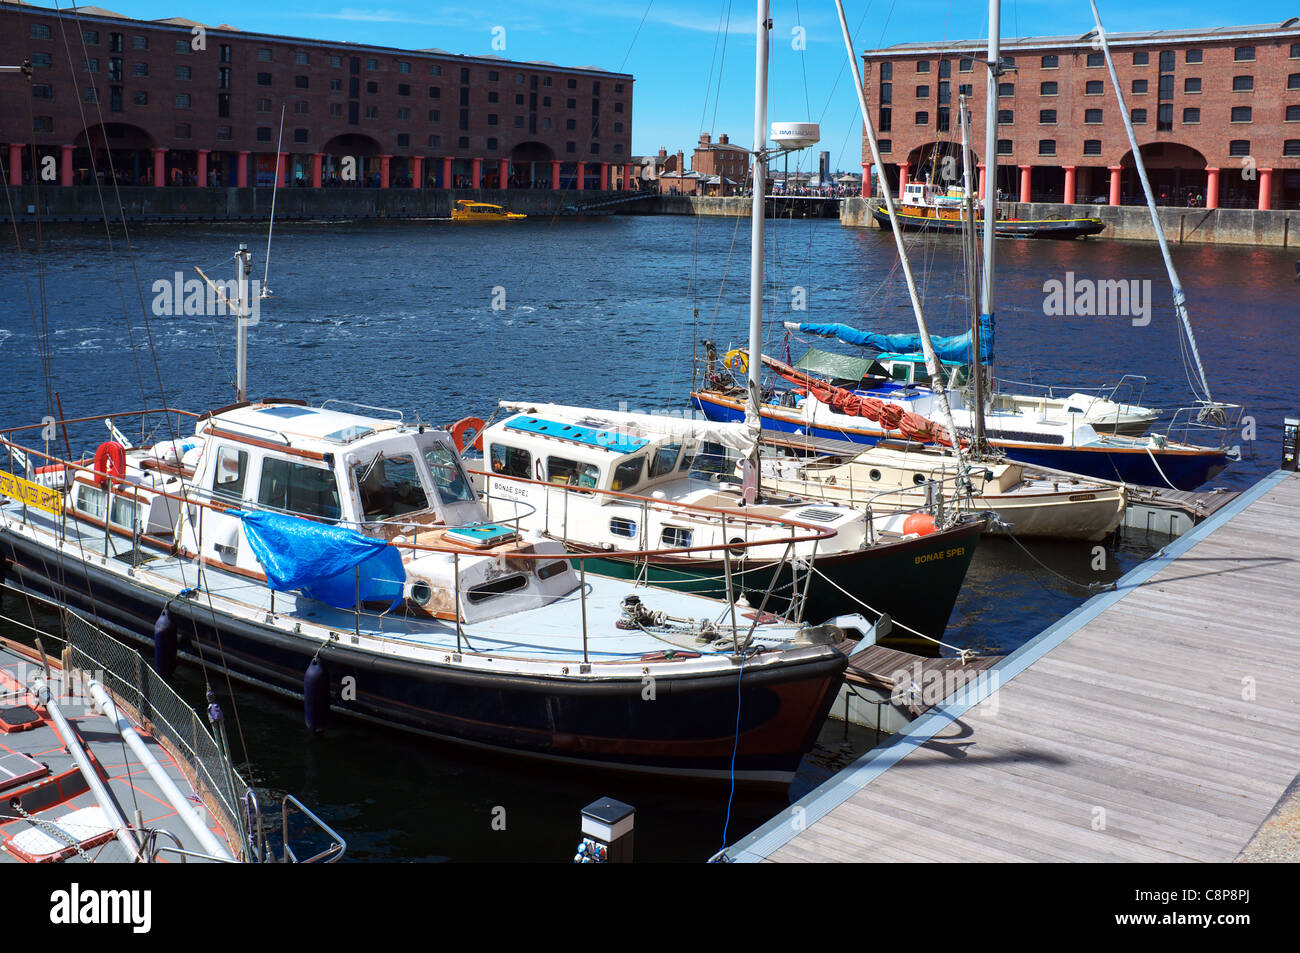 Albert Docks, Liverpool, England, UK, Great Britain. Listed as a World Heritage Site Stock Photo